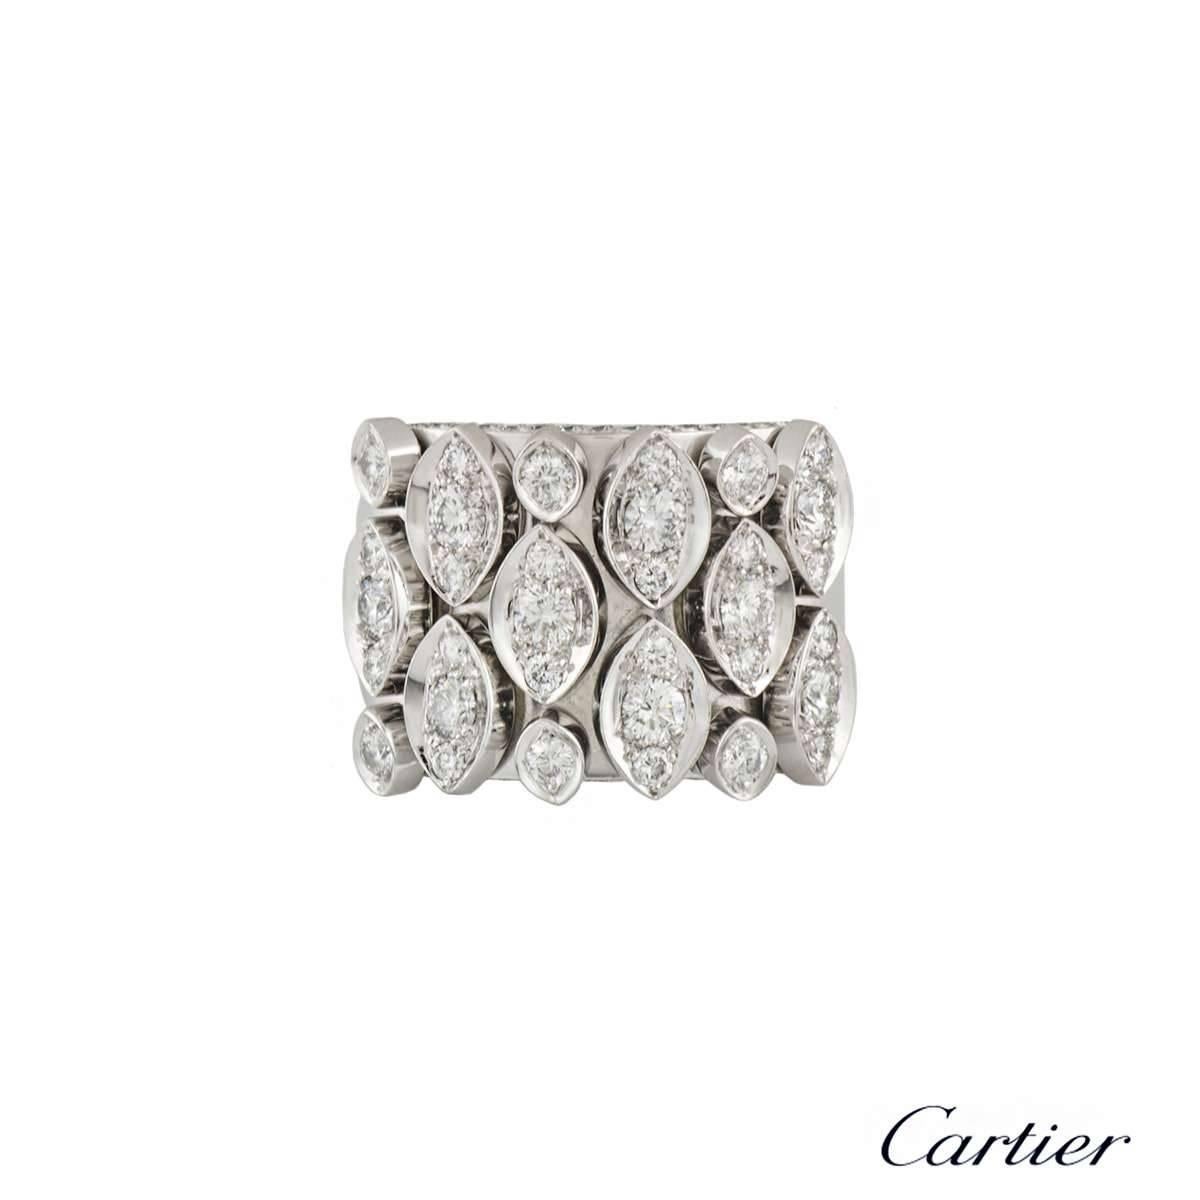 A sparkly 18k white gold Cartier articulated diamond ring. The ring comprises of marquise articulated motifs in different sizes with a total of 33 round brilliant cut diamonds set inside them. The ring has 30 round brilliant cut diamonds pave set on